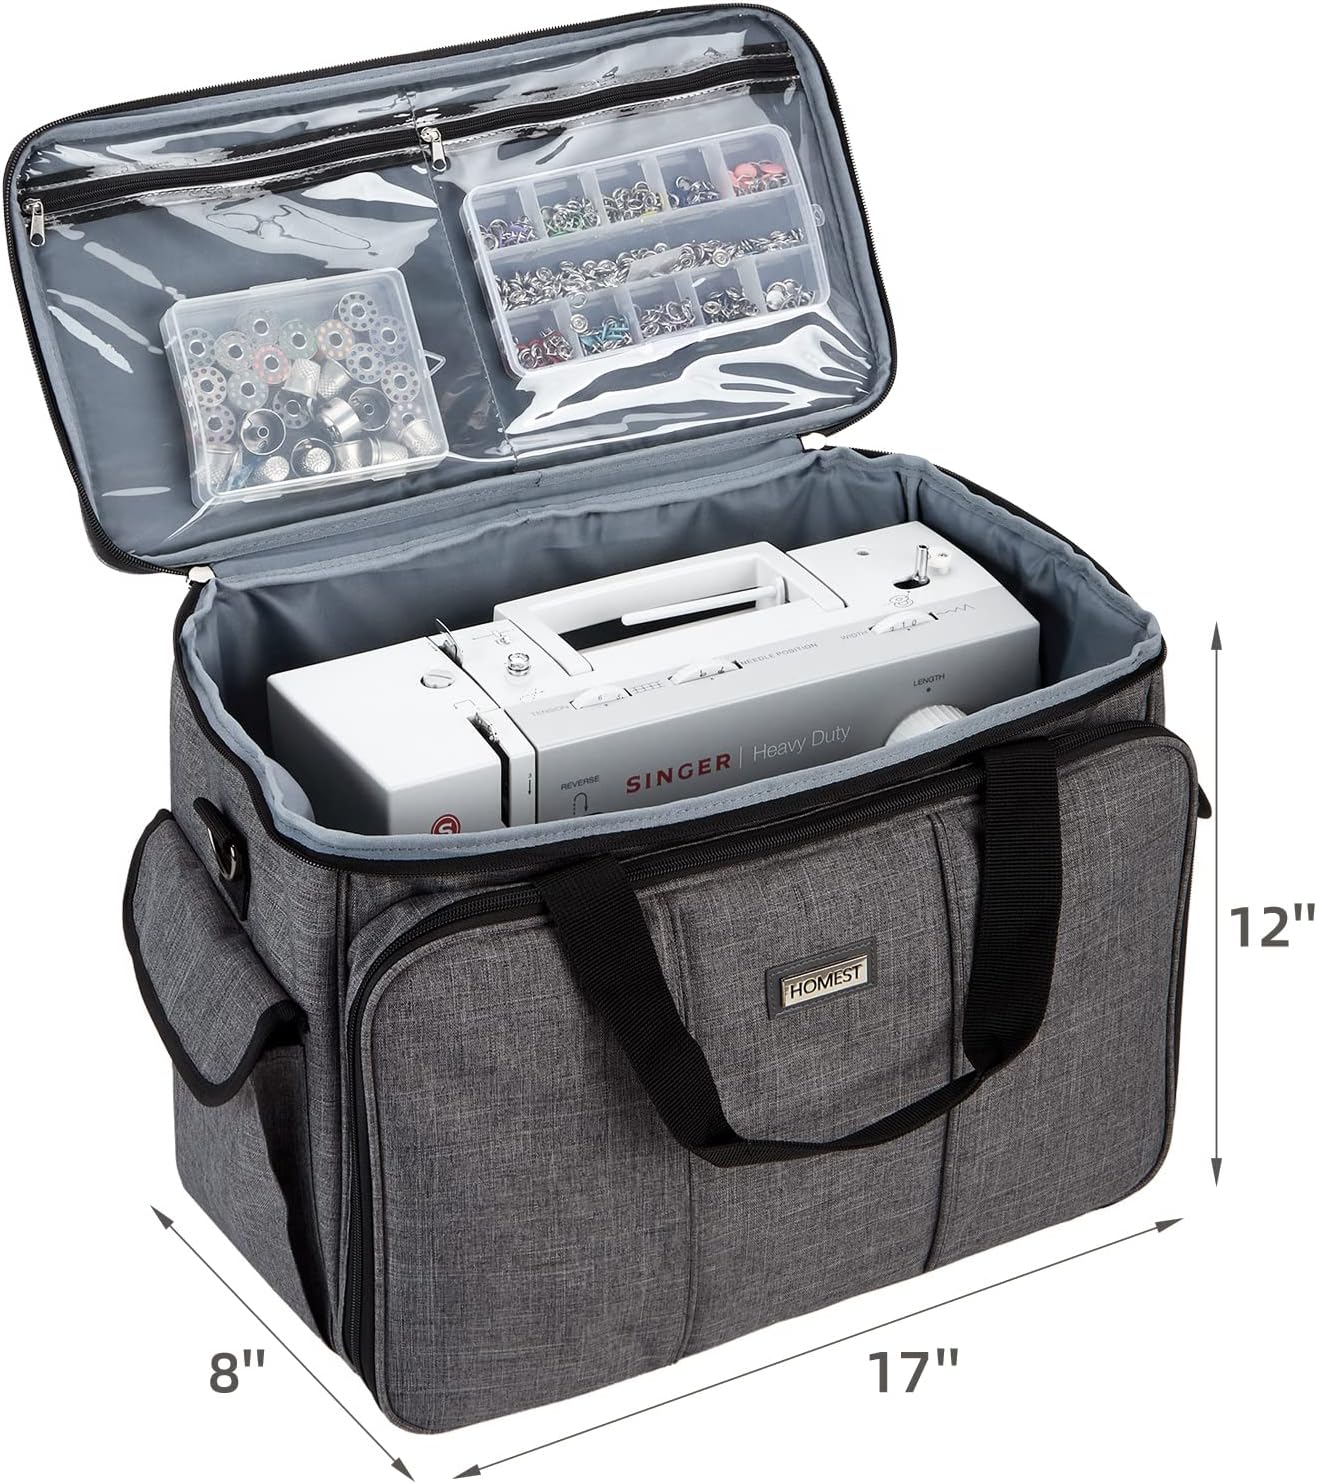 HOMEST Sewing Machine Carrying Case with Multiple Storage Pockets, Universal Tote Bag with Shoulder Strap Compatible with Most Standard Singer, Brother, Janome, Grey (Patent Design) Grey Style 1